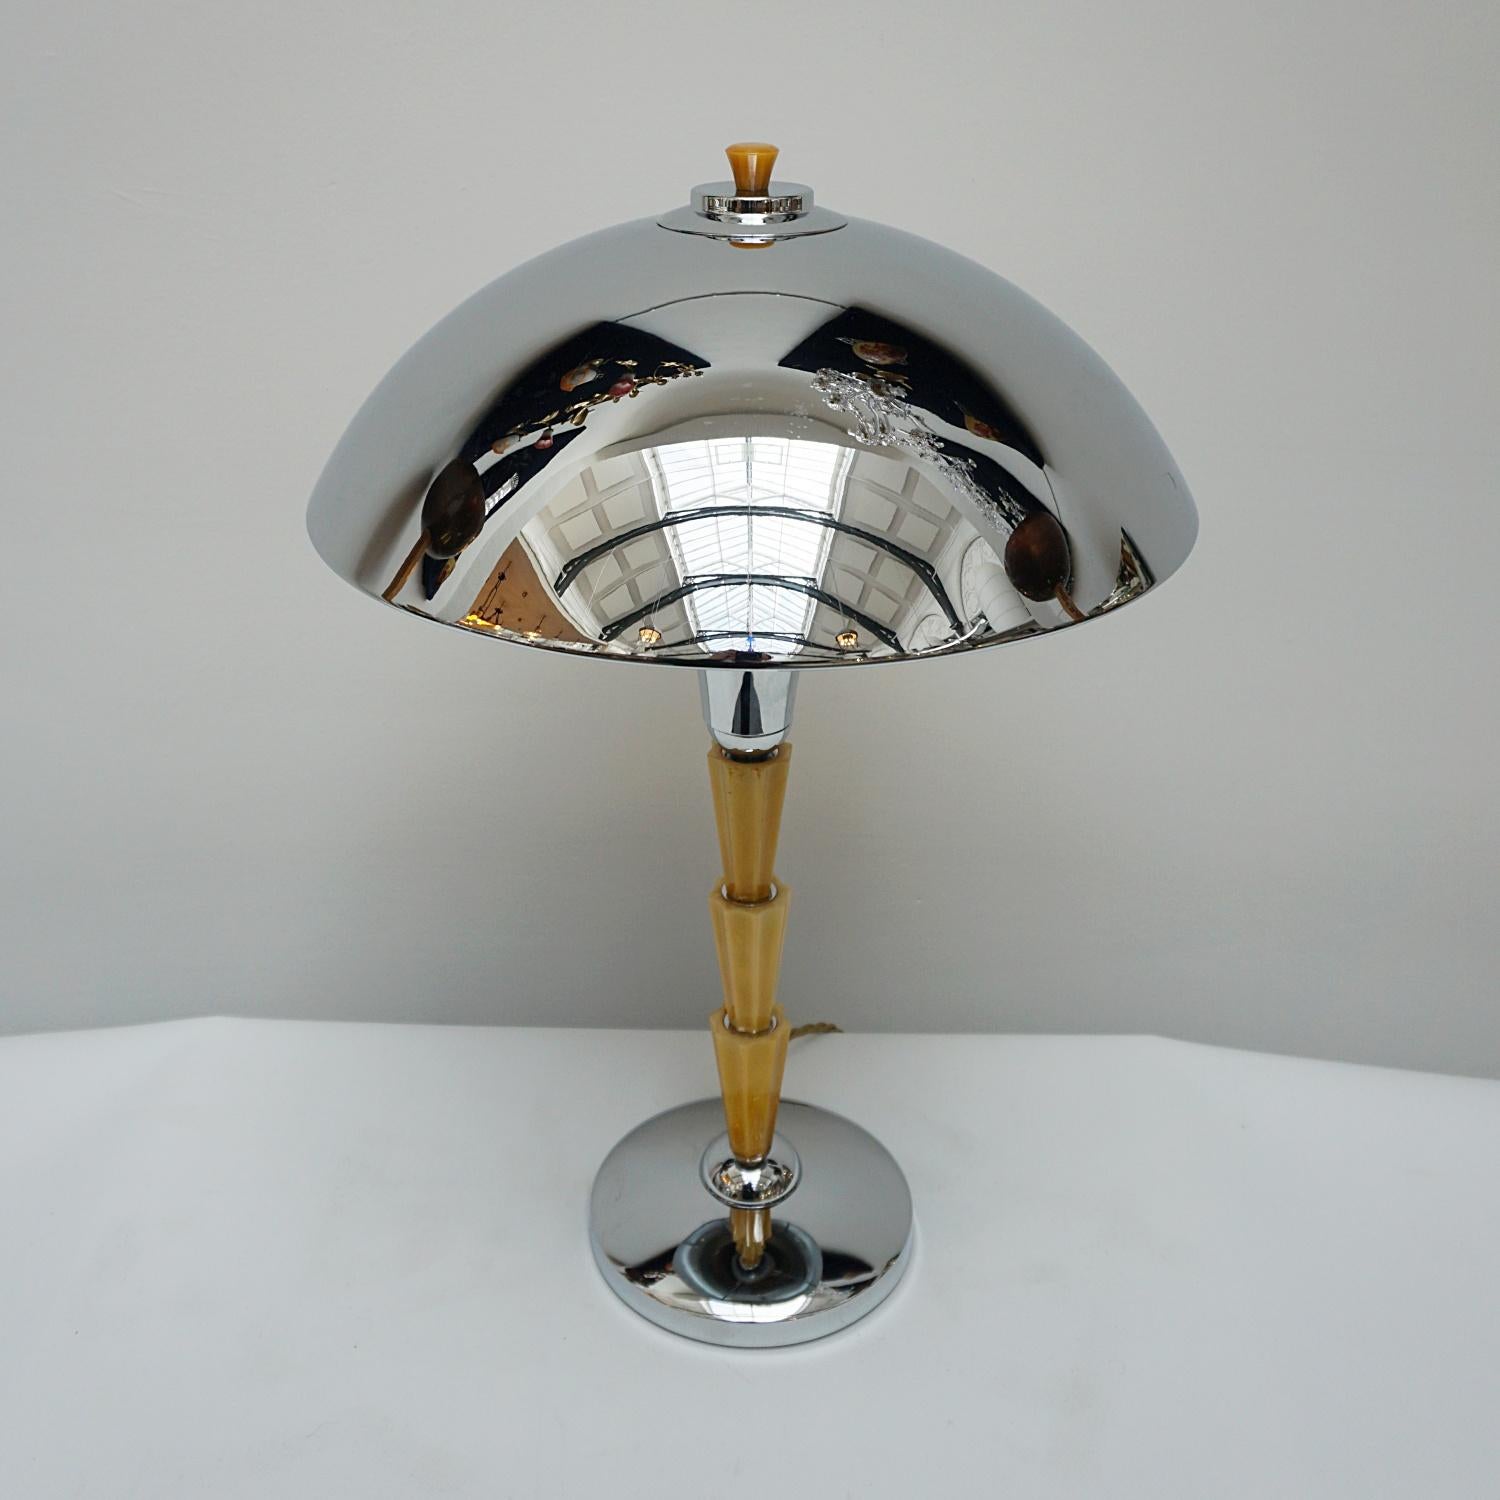 A pair of Art Deco style dome lamps. Three pieces of fluted marble yellow bakelite, set over a chromed metal base. Yellow finial topped chromed metal shade. 

Dimensions: H 53cm Diameter of shade: 37cm, of base: 17.5cm

All of our lighting is